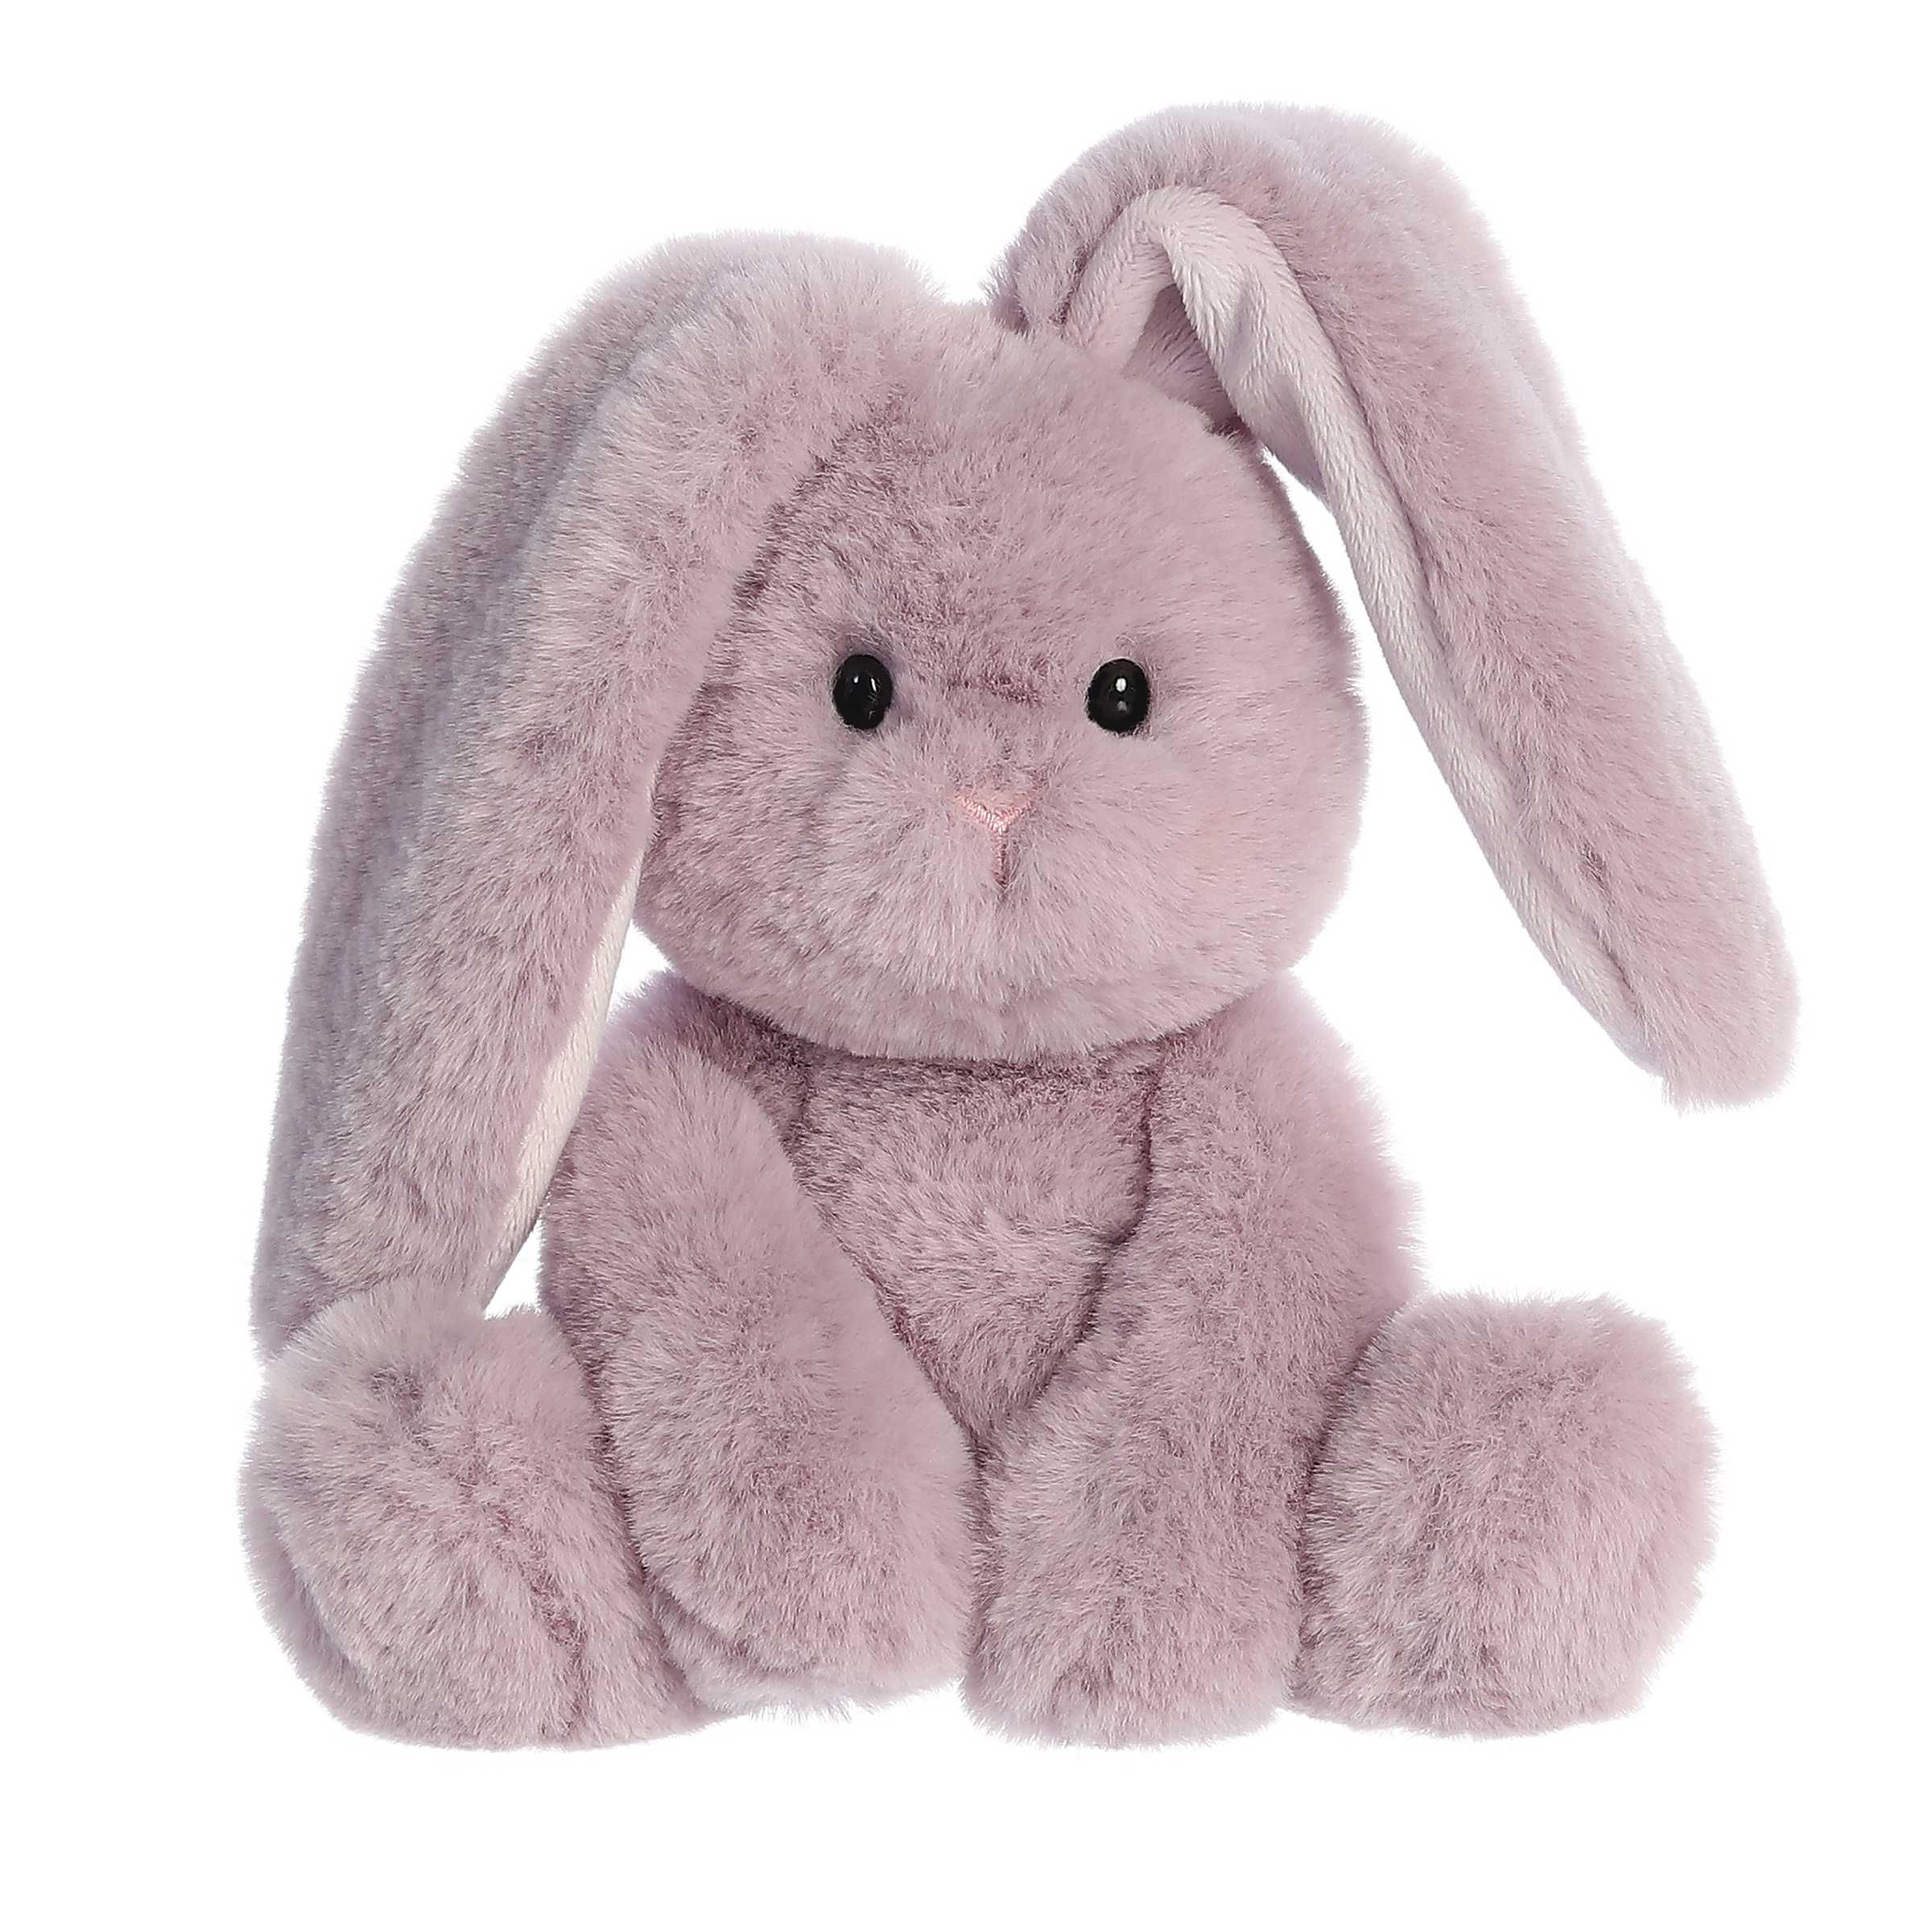 Lilac Candy Cottontail plush with soft lavender fur, bright eyes, and velvety ears, part of the exclusive Candy Cottontails